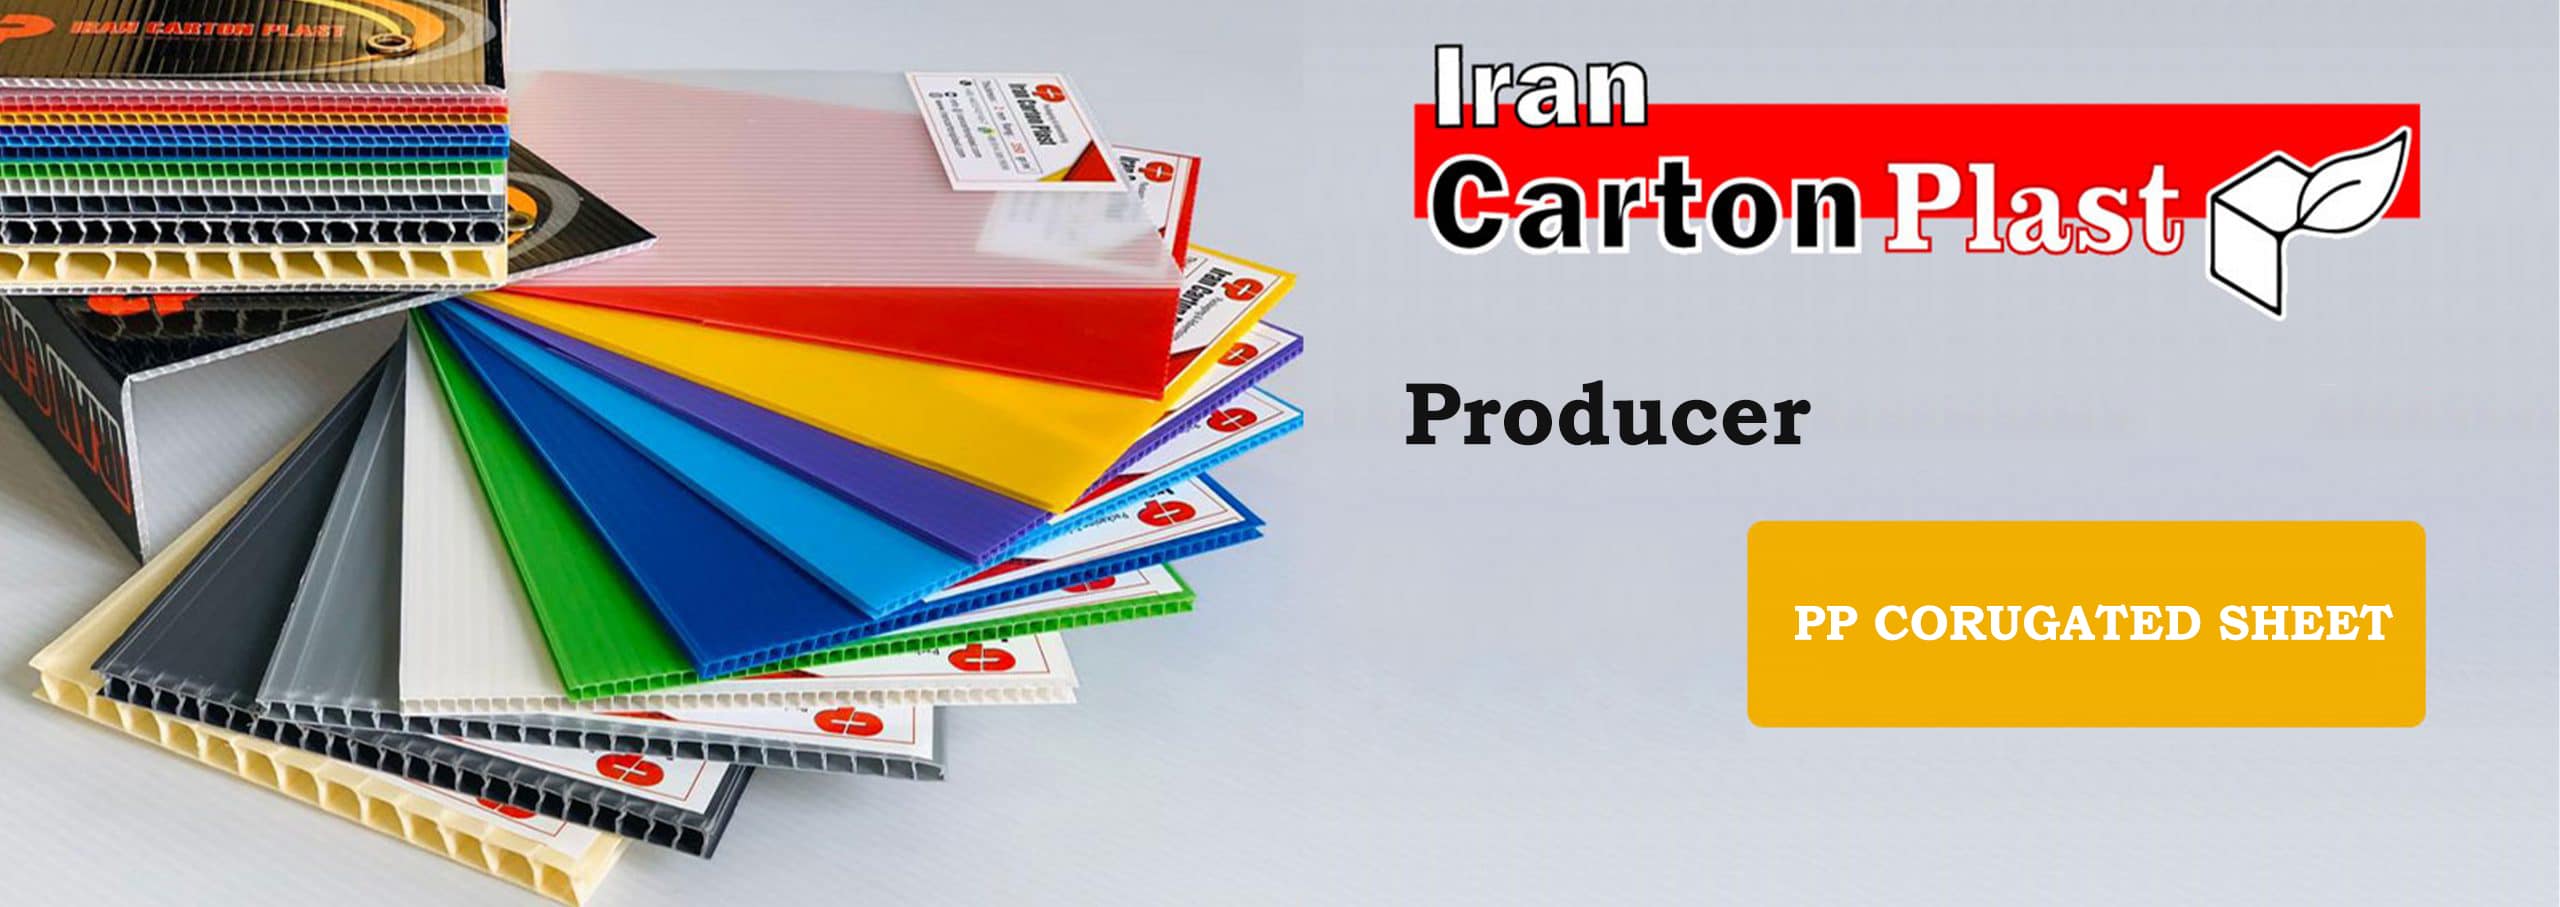 20202 scaled 1 1 - Iran Carton Plast is the largest production and sales reference for CartonPlast in Iran